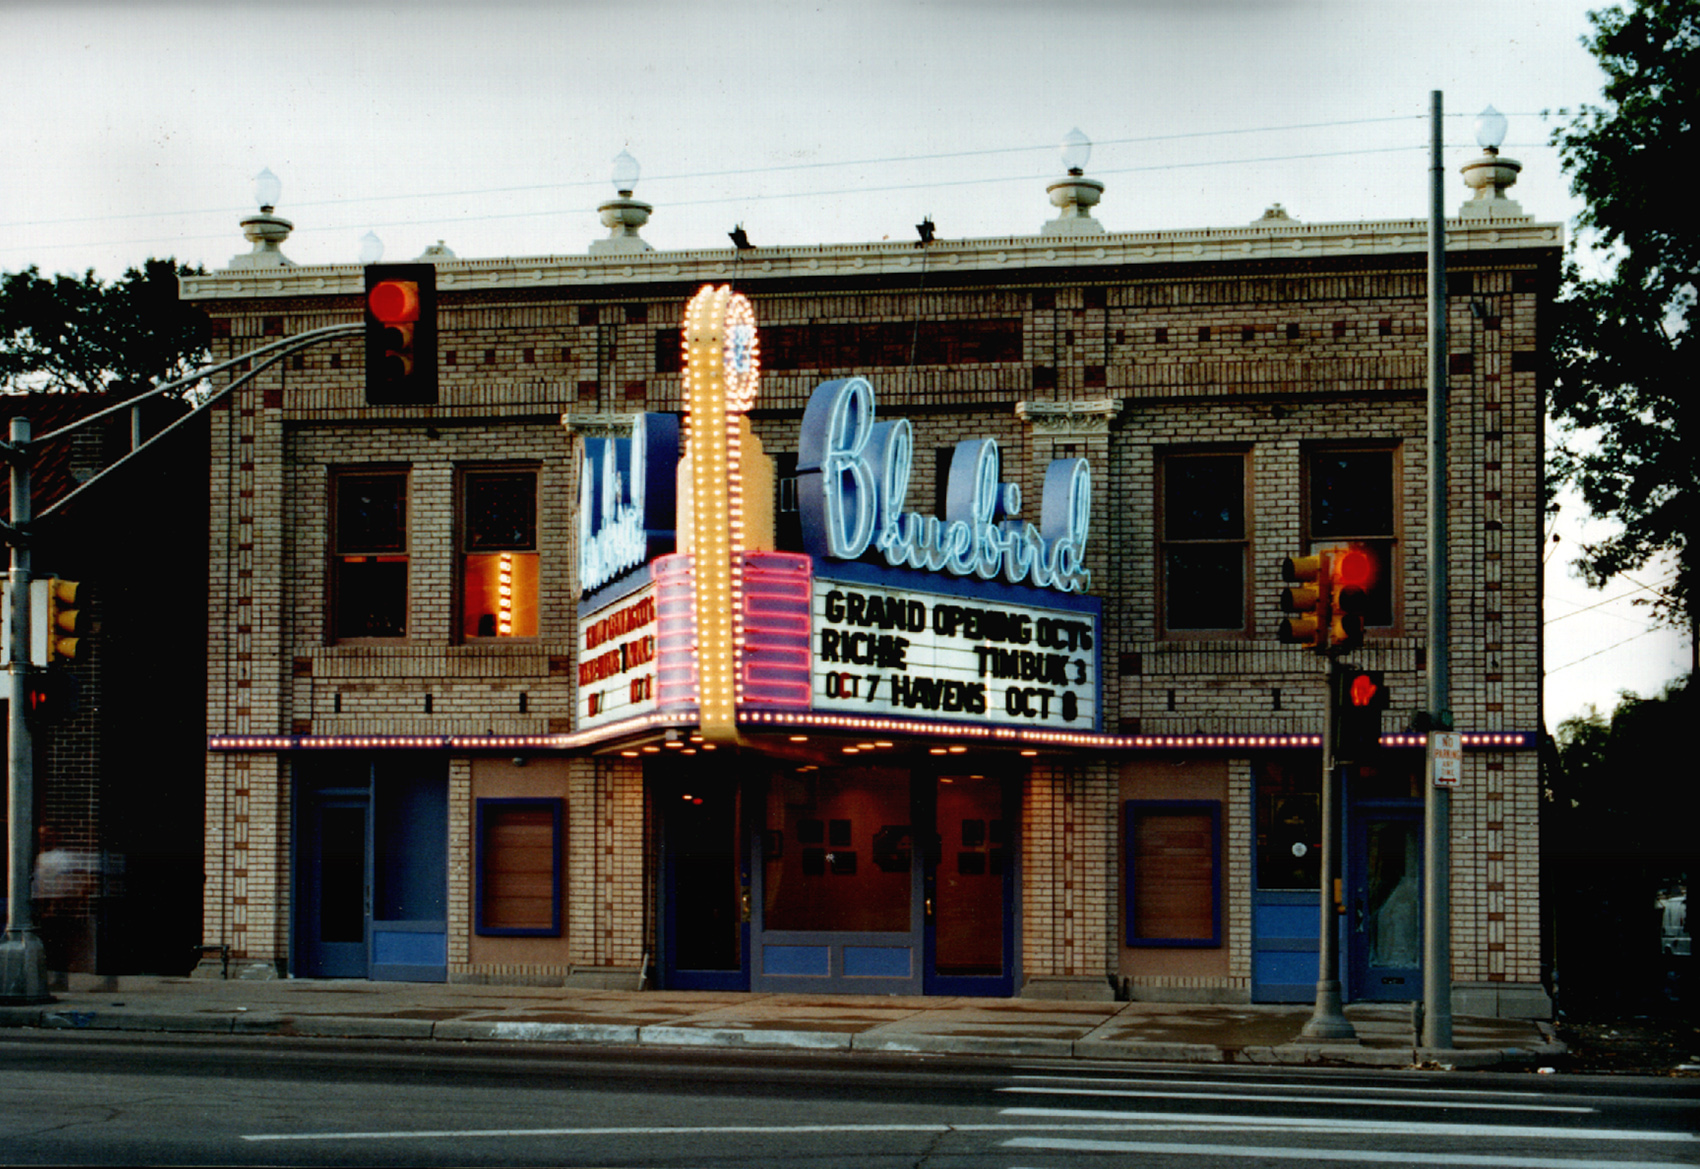 Facade of Bluebird theatre on Colfax and Marquee signage